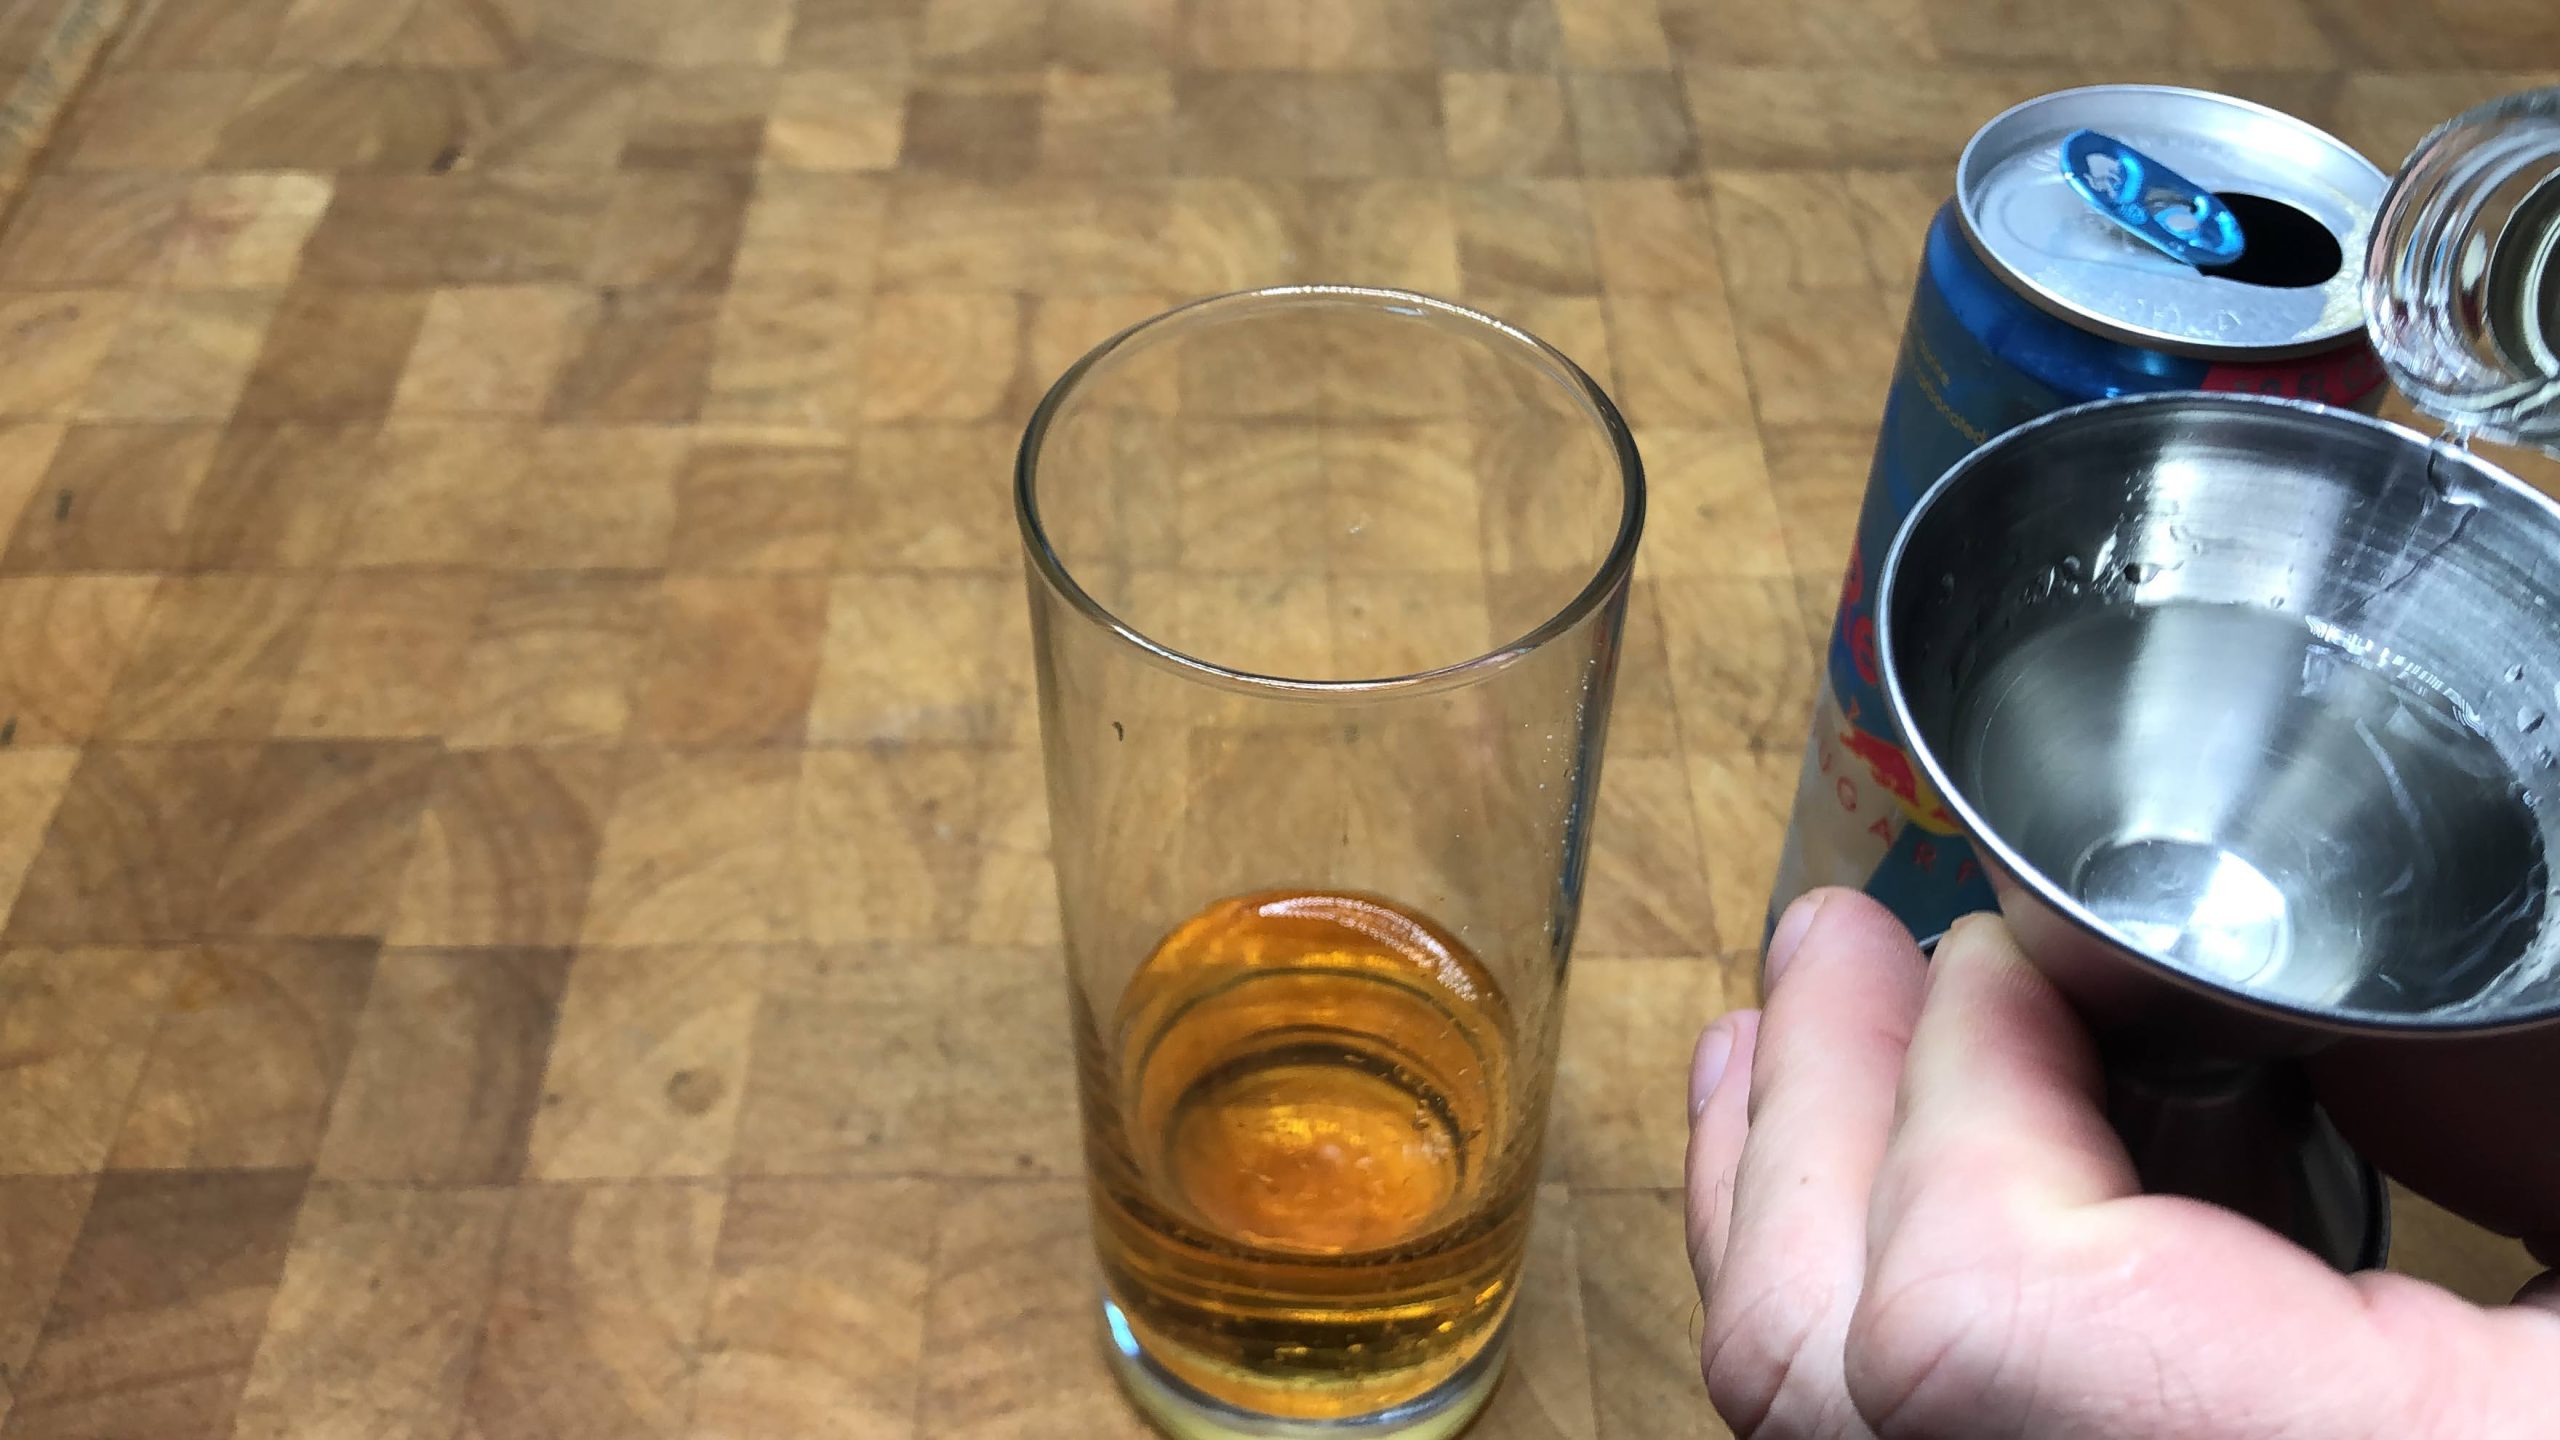 pouring goldschlager into a shot glass